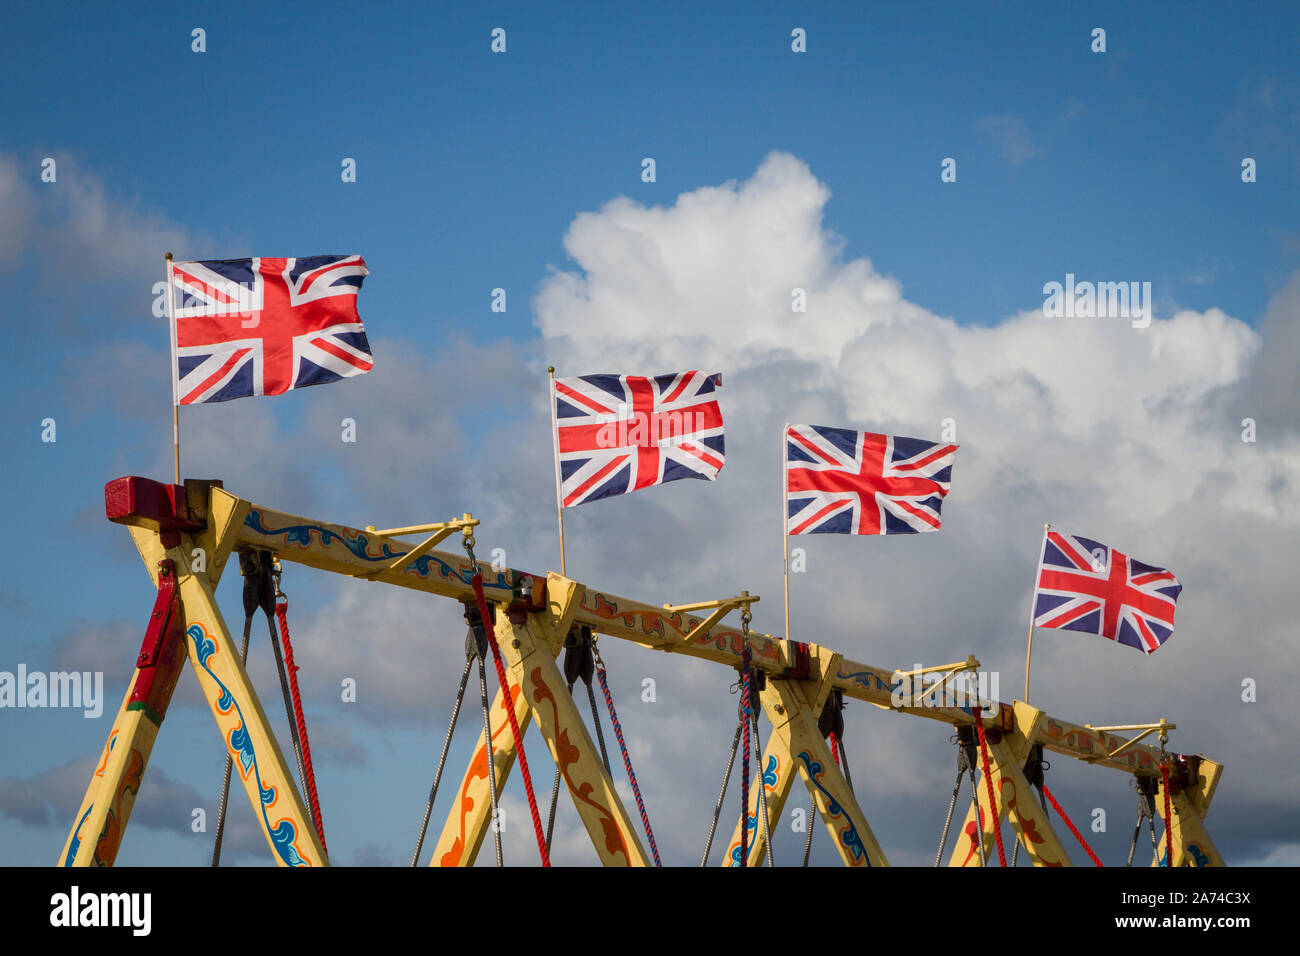 A row of colourful Union Flags on the top of  vintage fairground swings against a bright blue sky Stock Photo